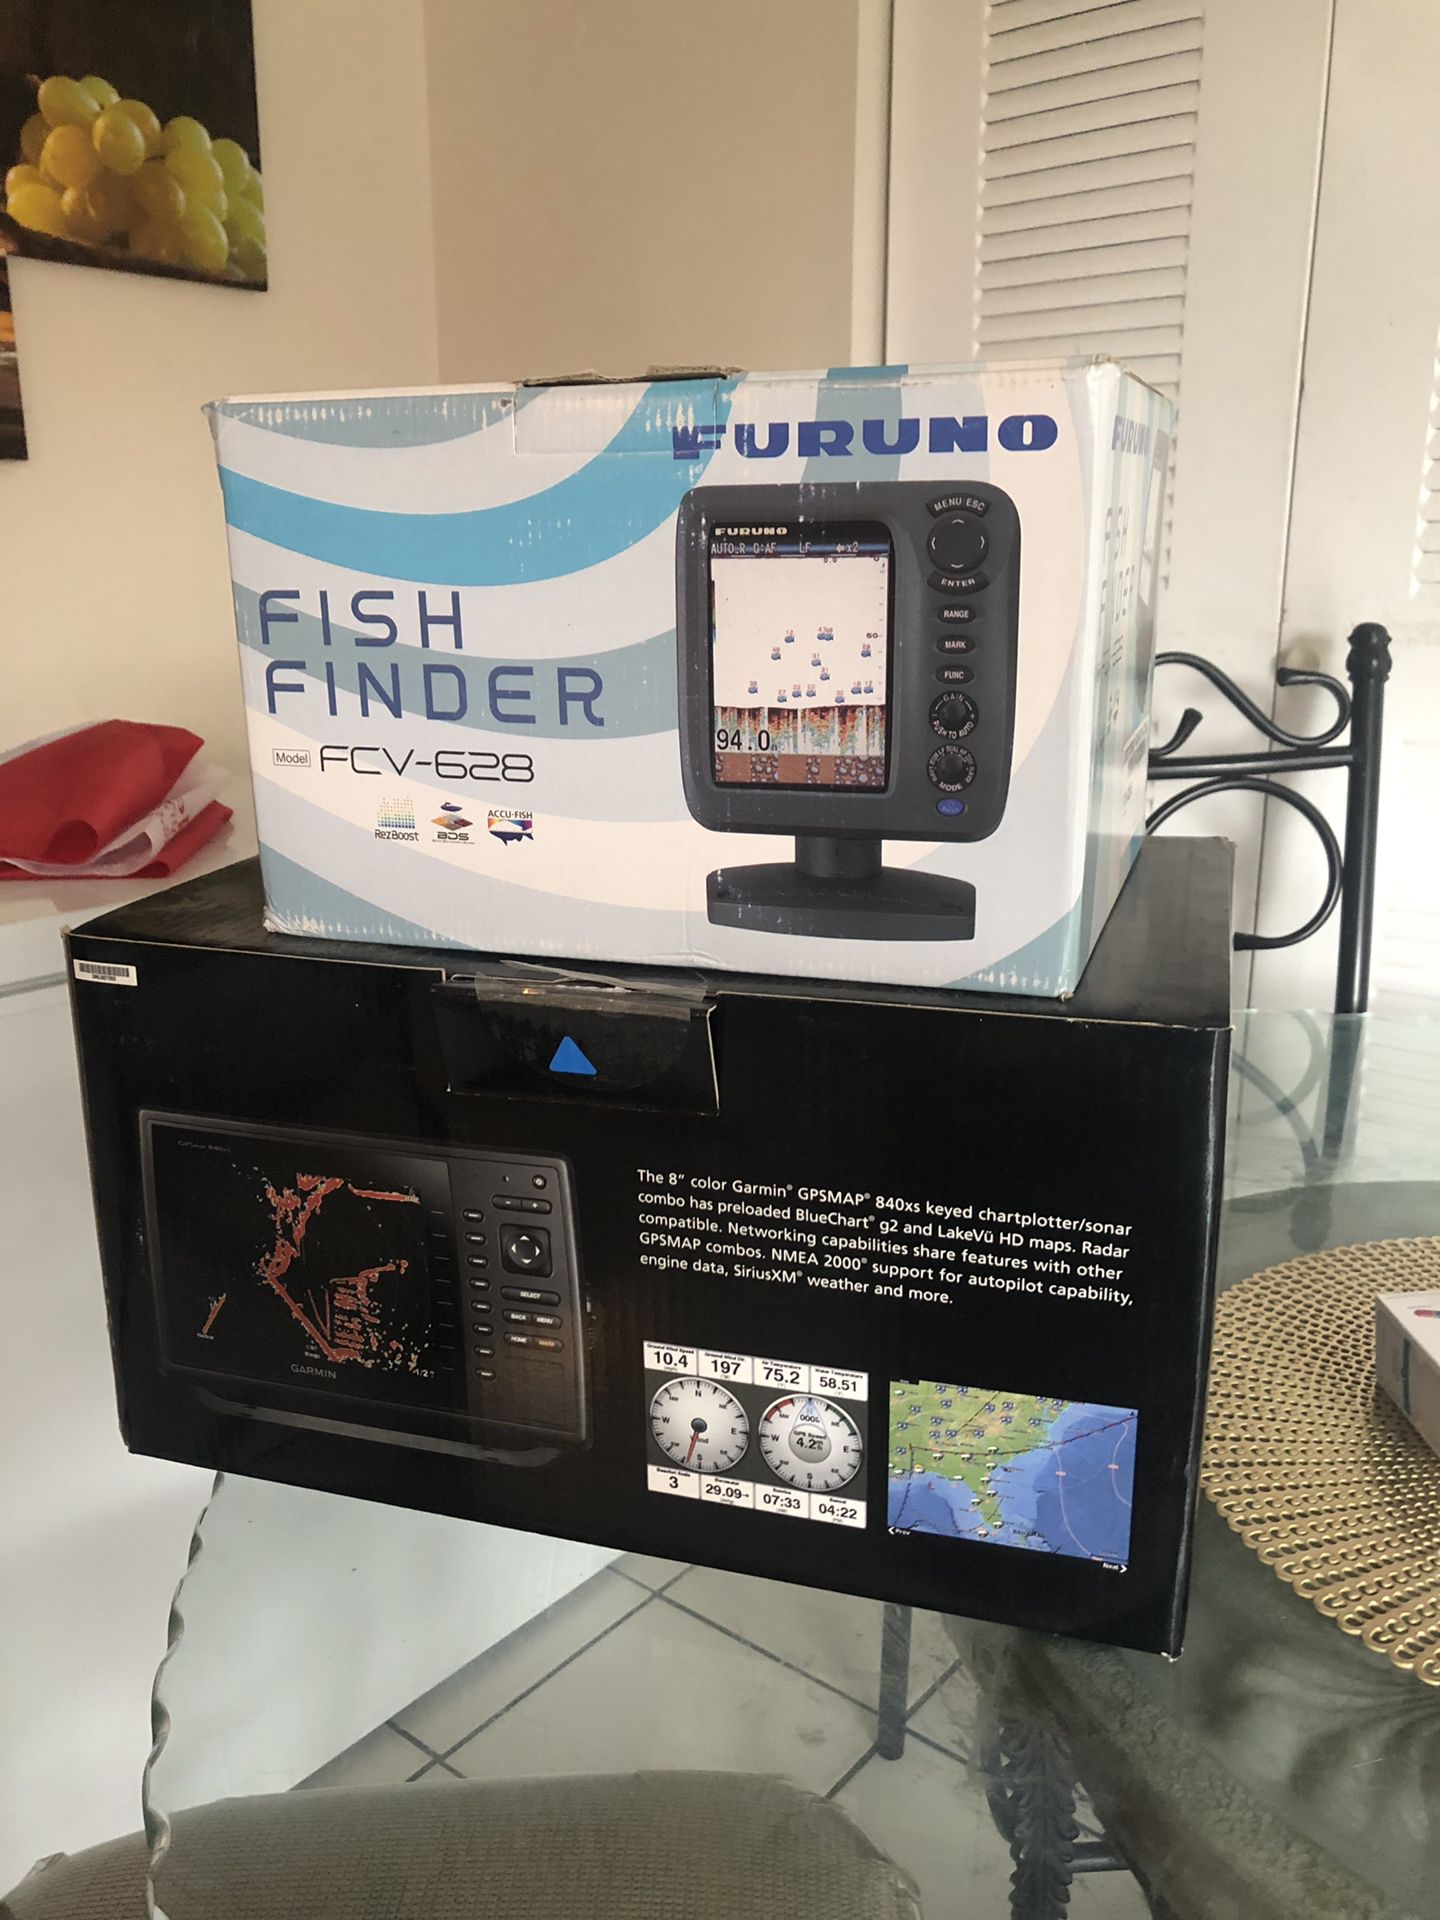 Garmin one is a combo gps sonar furuno just fish finder they are both almost new as you can see 900 dollars obo.garmin es un combo el furuno es solo